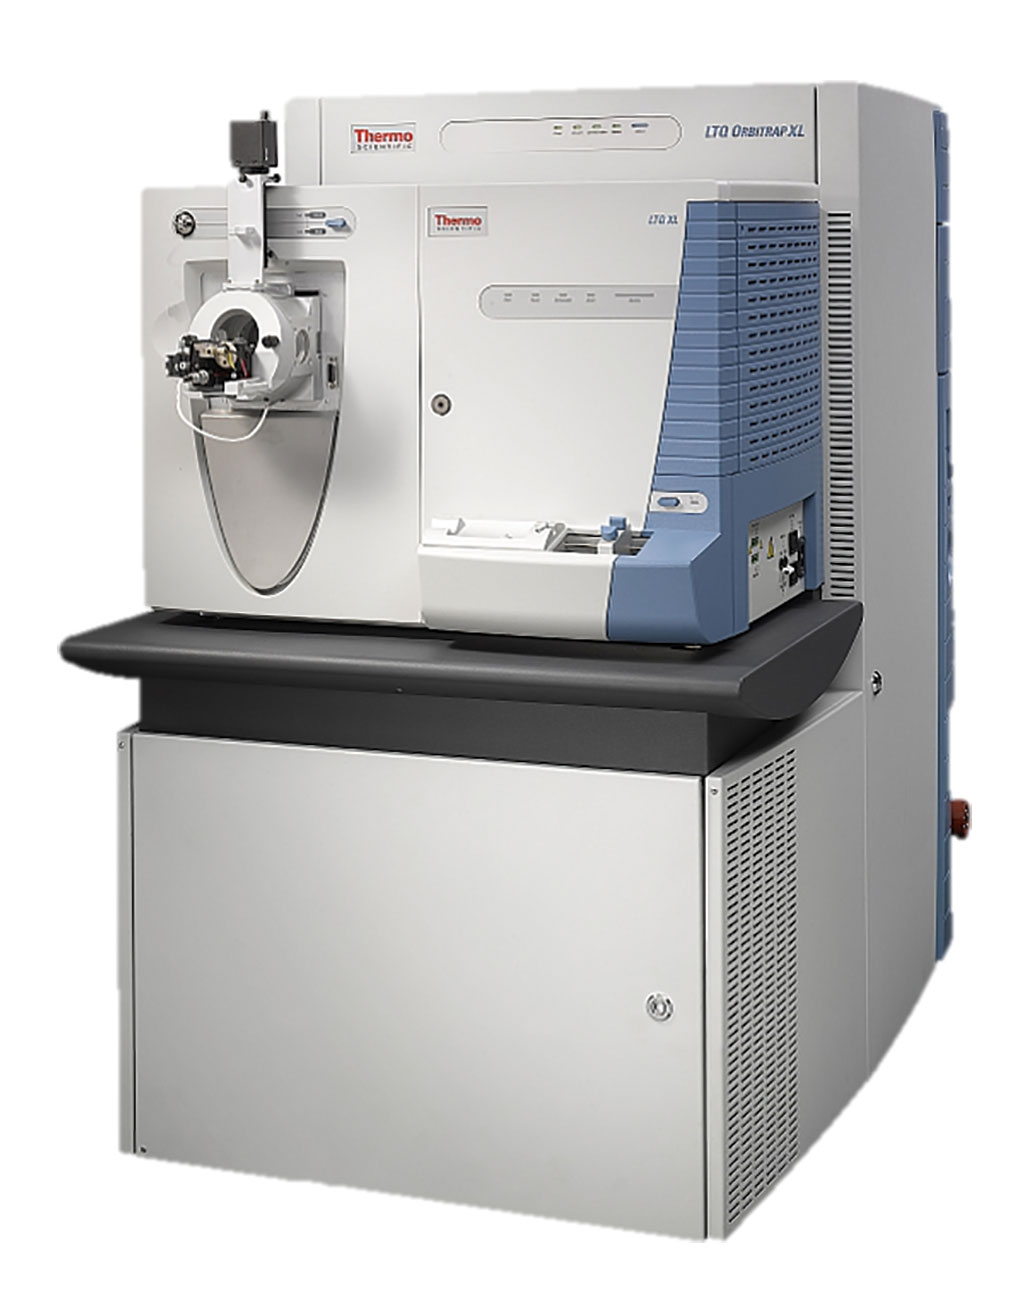 Image: The Thermo Fisher Scientific Orbitrap Velos mass spectrometer features dual-pressure linear ion trap technology that delivers increased sensitivity and dynamic range with ultimate robustness (Photo courtesy of University of Michigan)